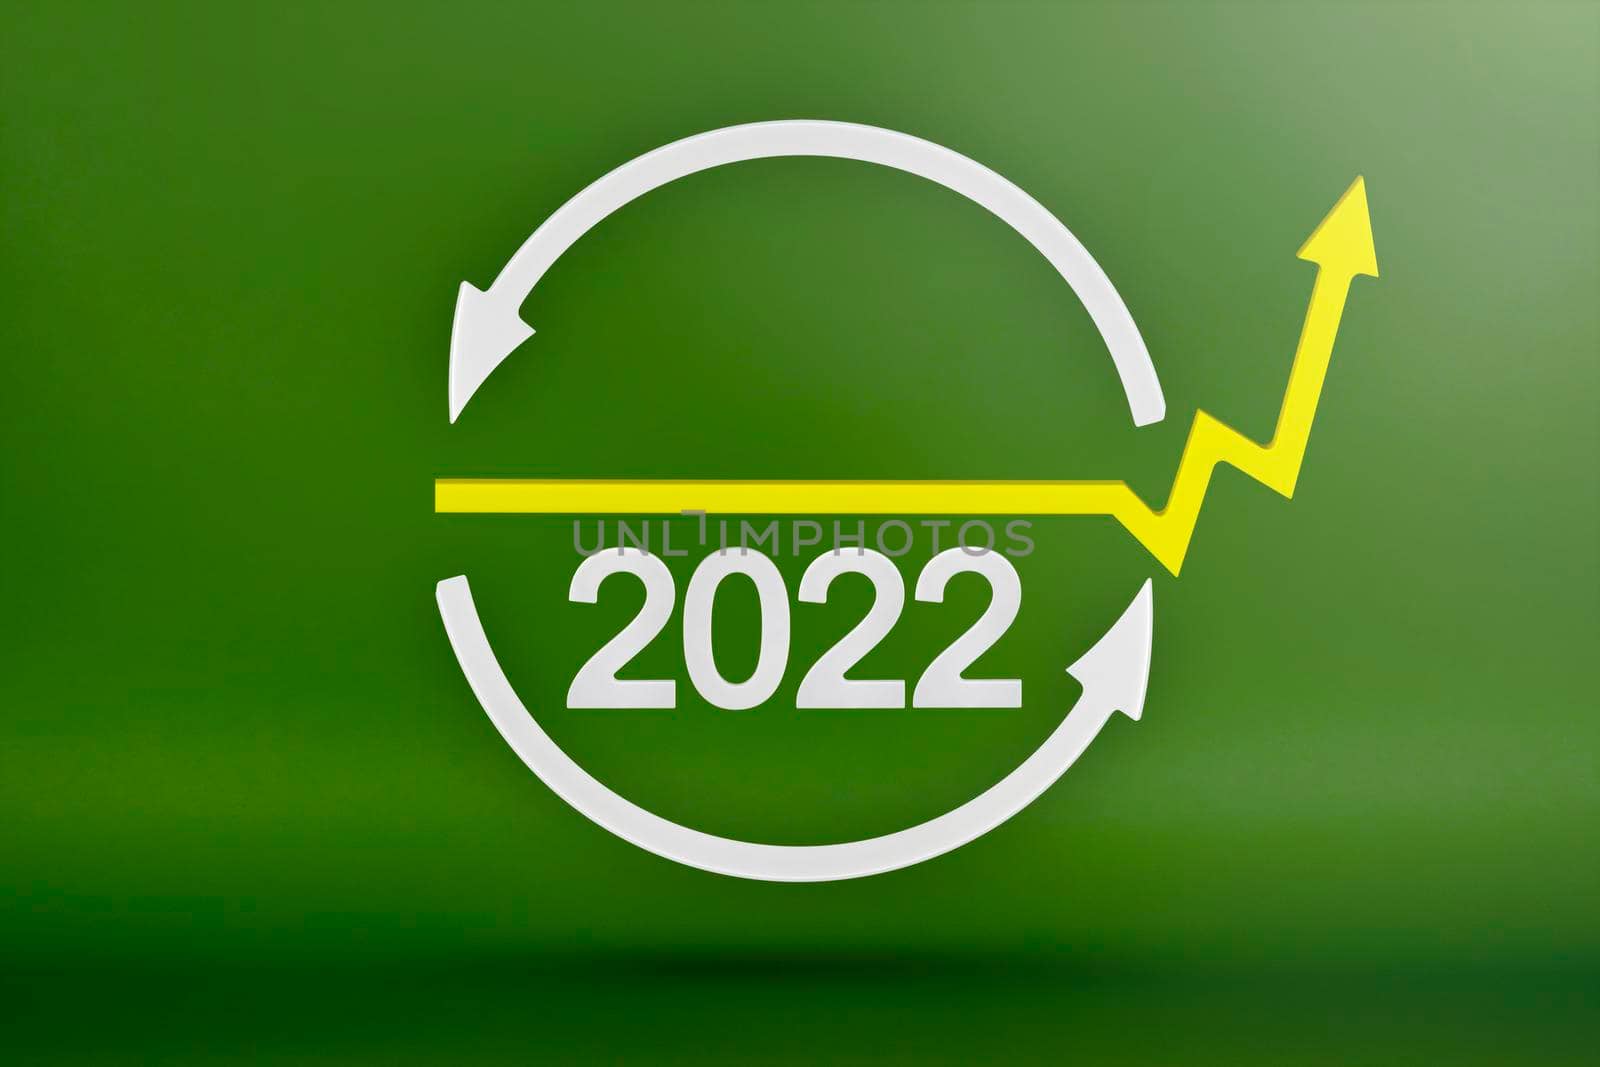 Ecology, recycling symbol 2022, white arrows form a circle. 3D image on a green background. Green products, green renewable energy, graph pointing up and down by SERSOL